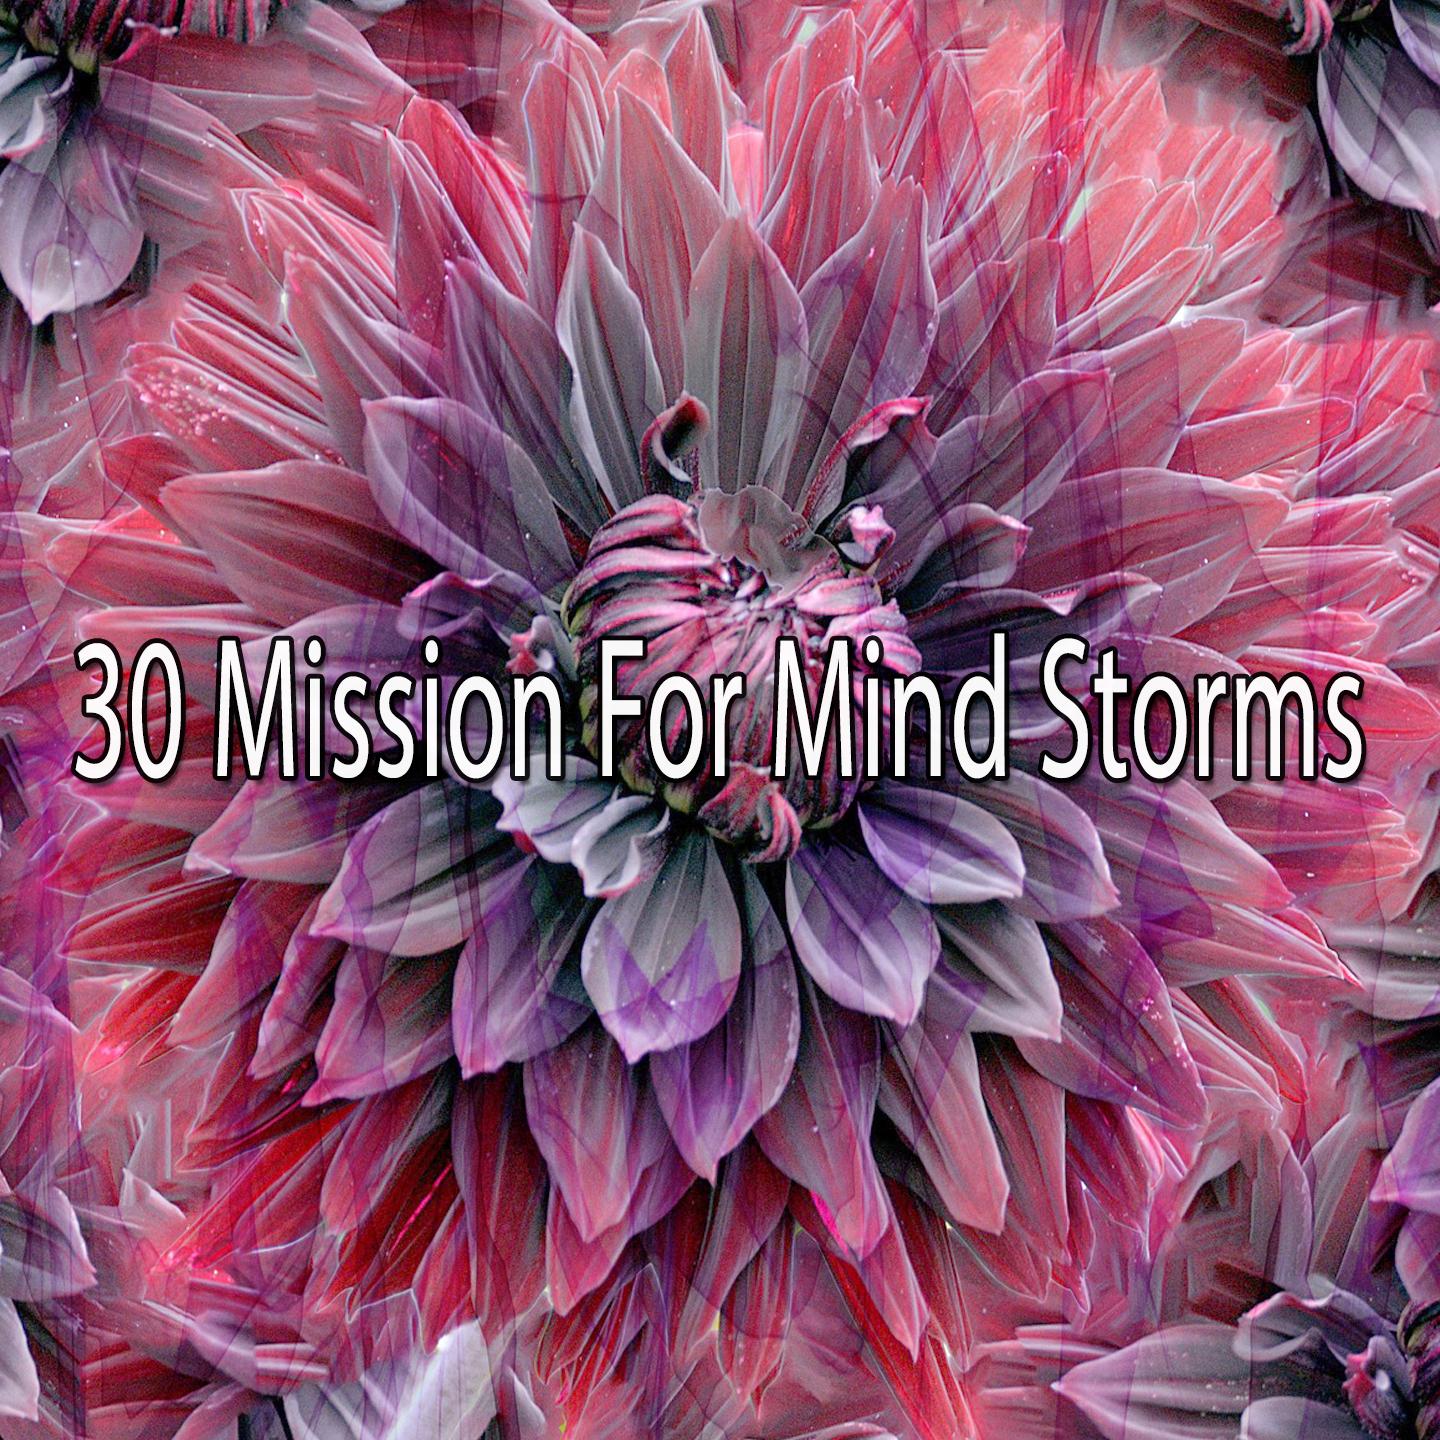 30 Mission for Mind Storms